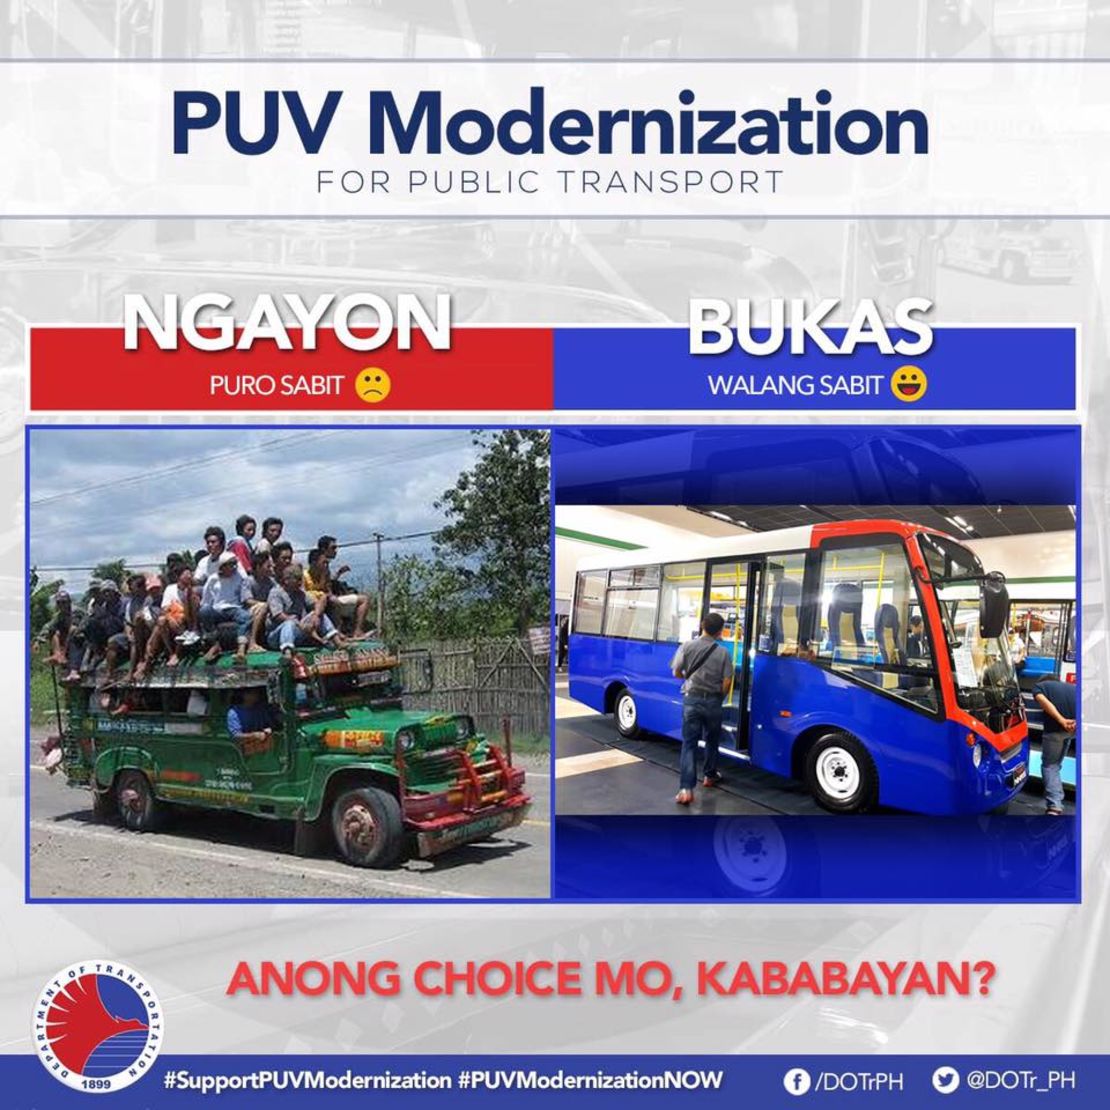 A poster from the PUV (public utility vehicle) Modernization campaign. The poster says the new vehicles won't permit "sabits" or passengers that "hang" rather than sit in seats, because of overcapacity. 